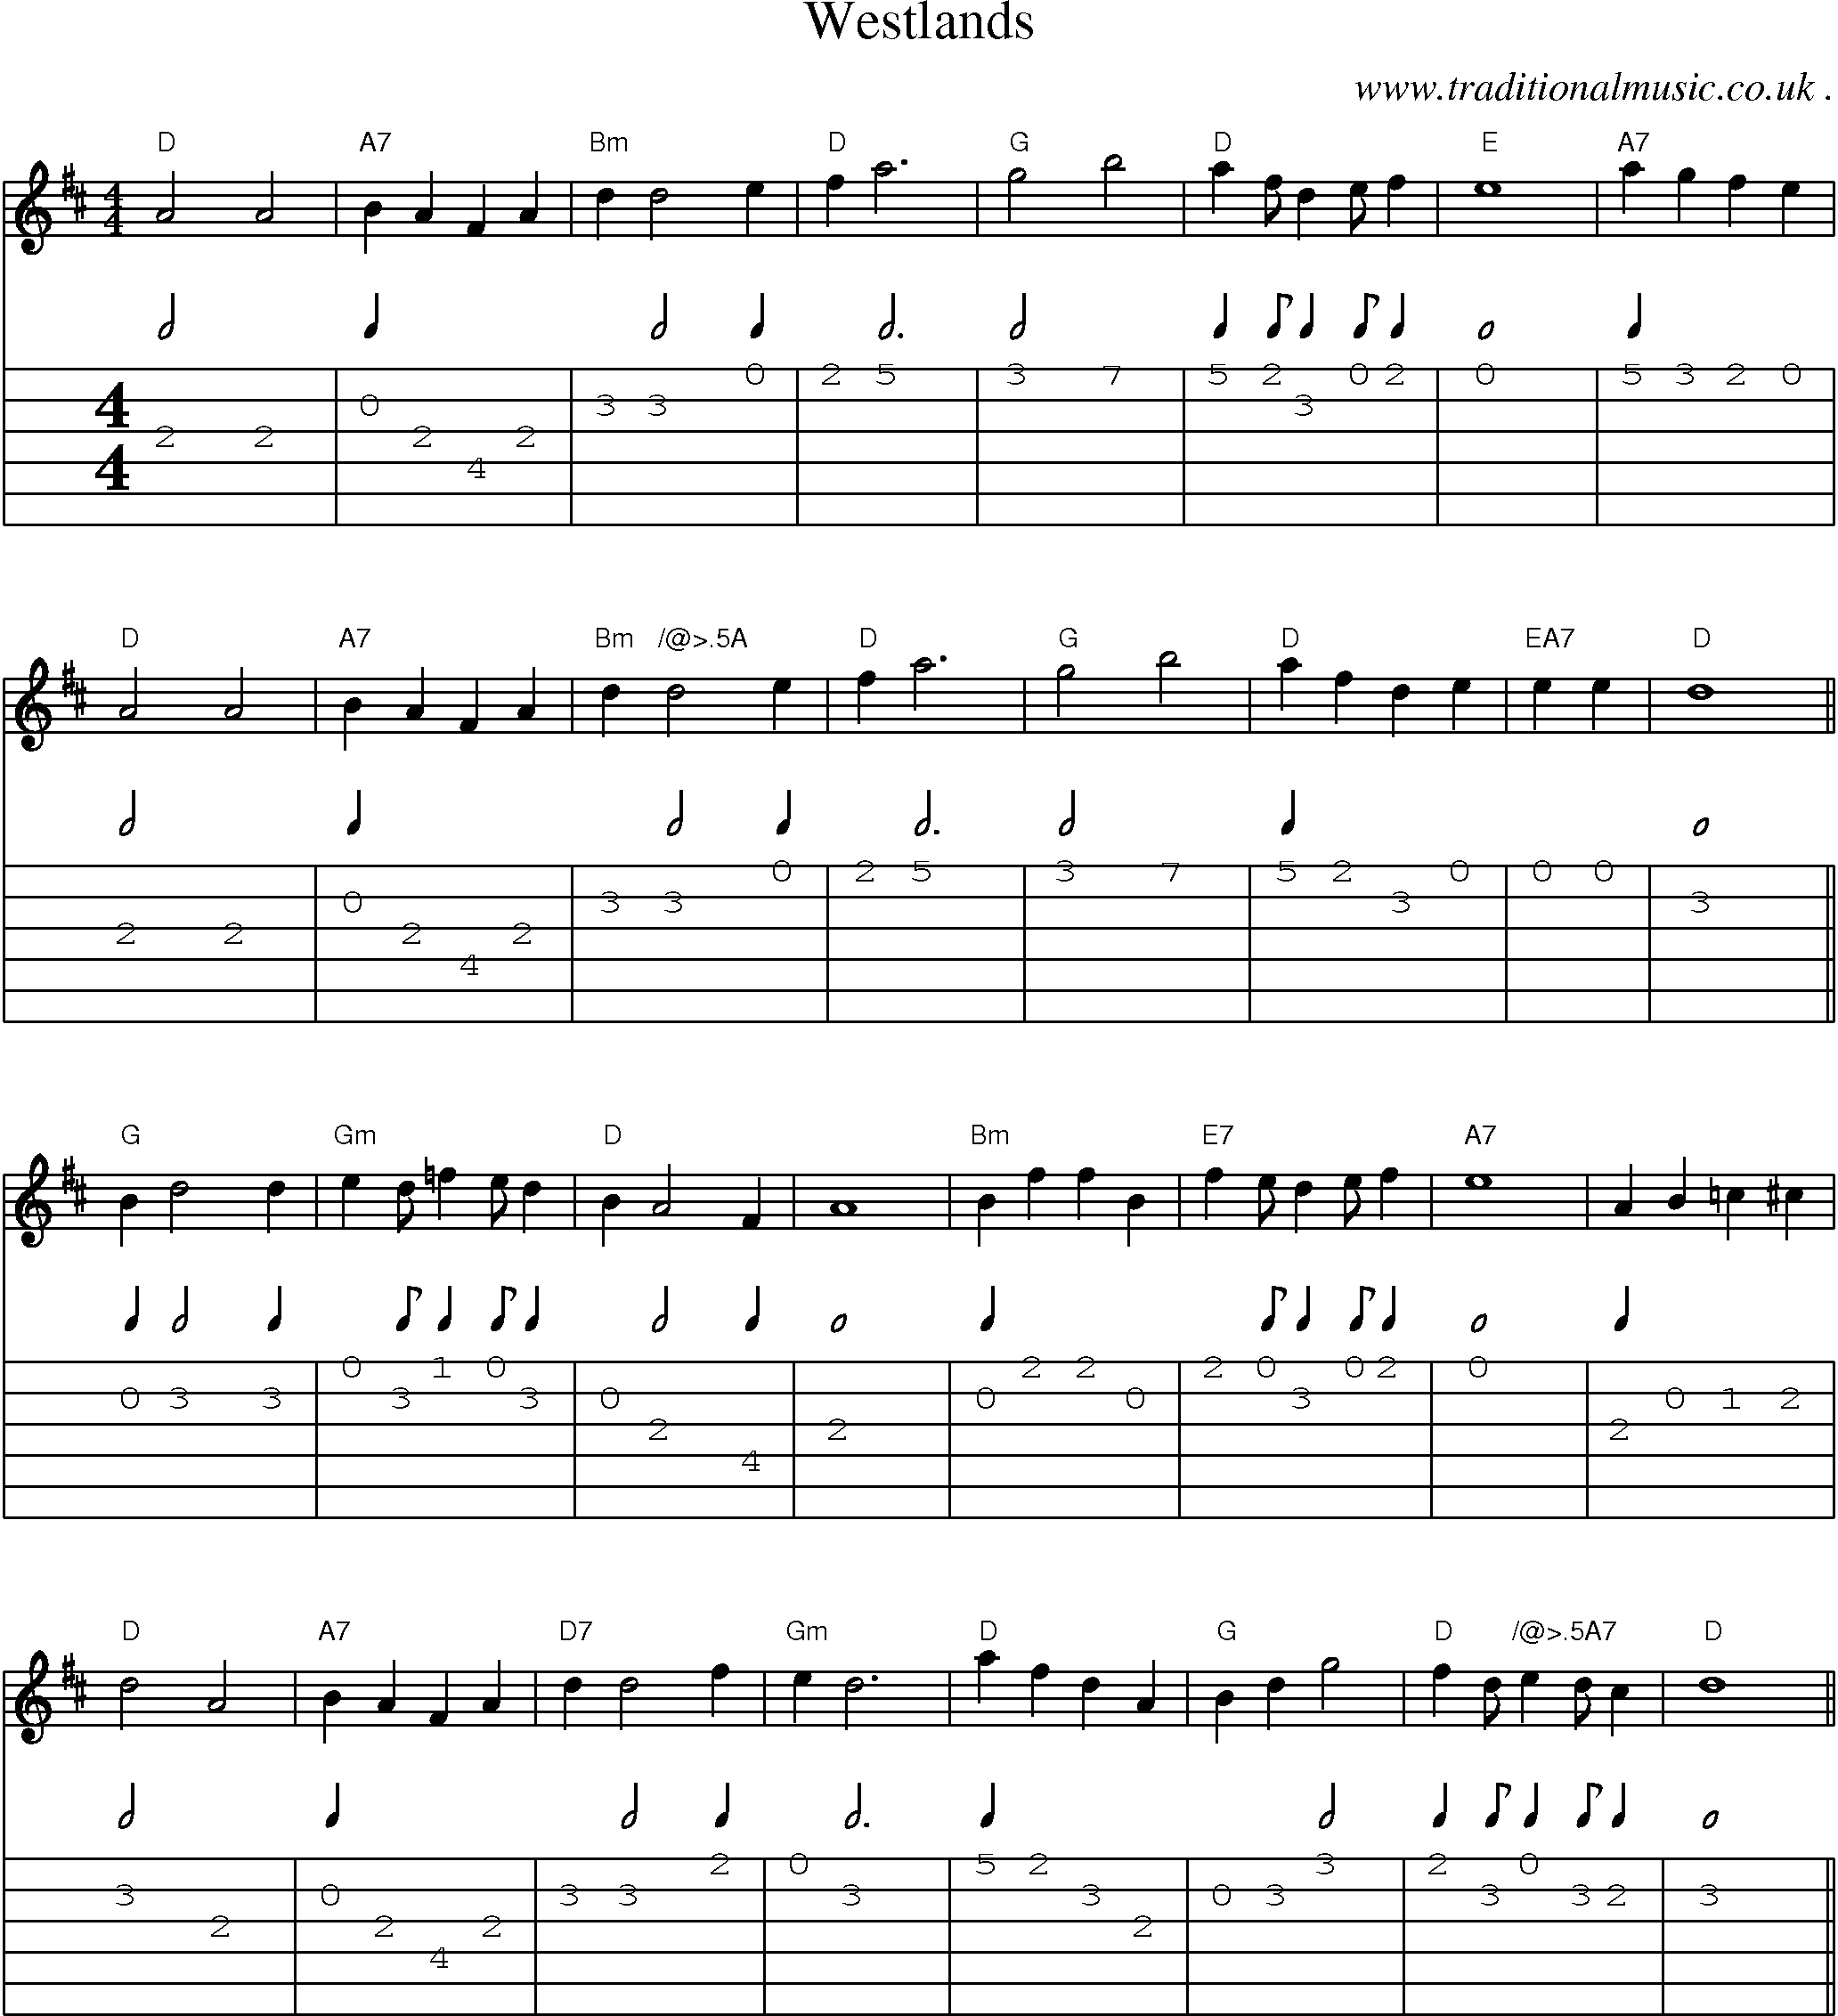 Sheet-Music and Guitar Tabs for Westlands